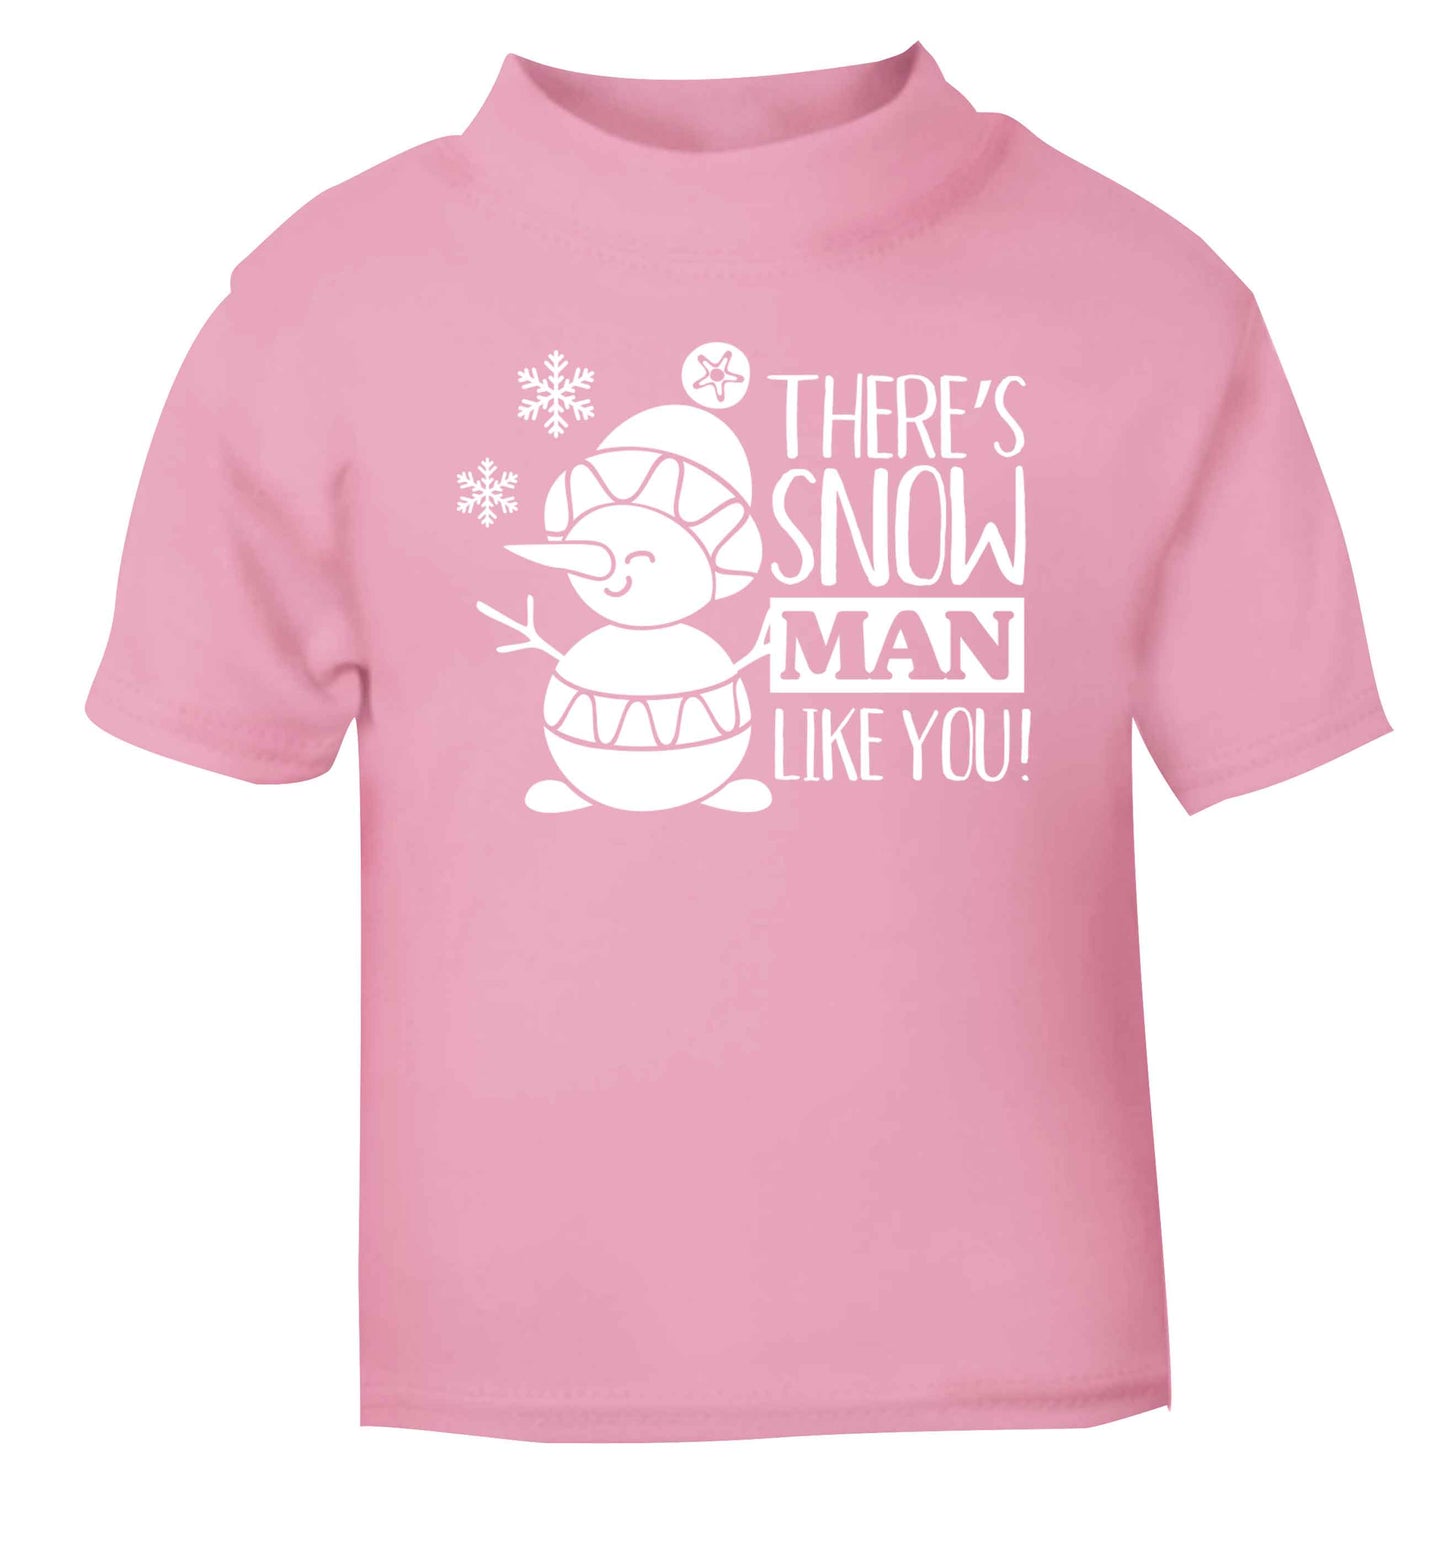 There's snow man like you light pink baby toddler Tshirt 2 Years